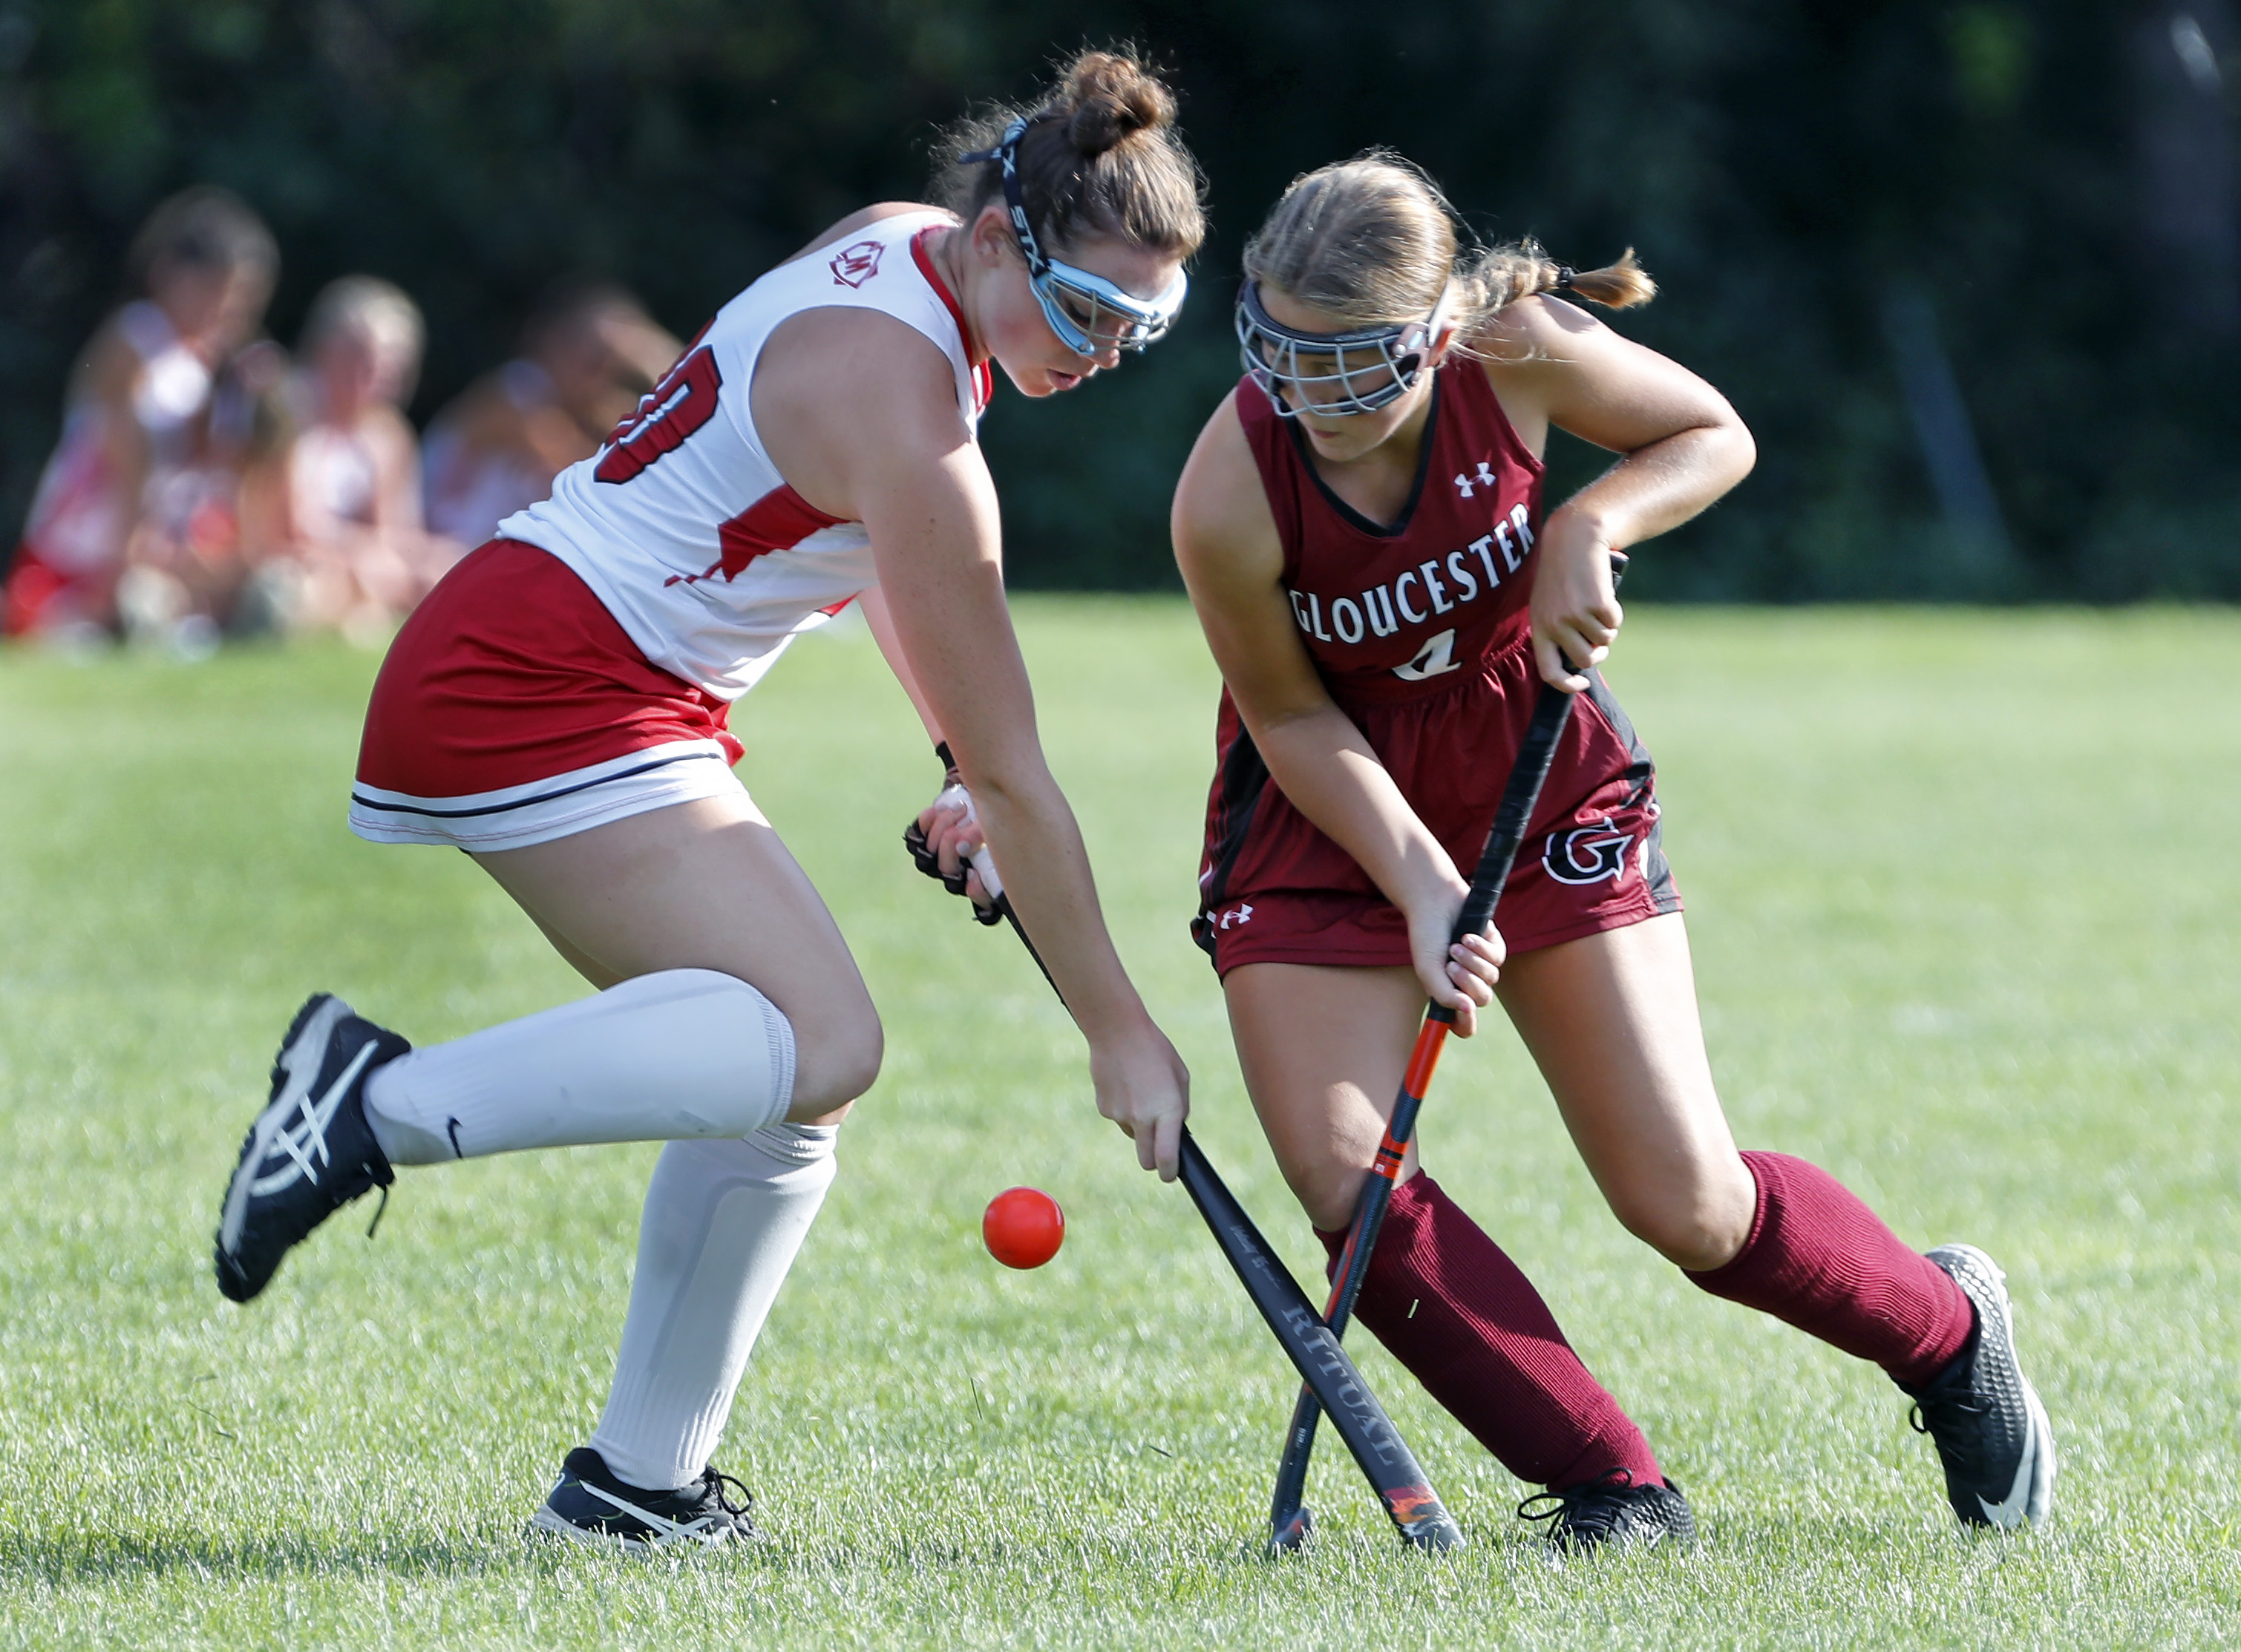 Masconomet's Allison Baker (left) and Gloucester's Abby Lowthers battle for possession during Monday's Northeastern Conference game.